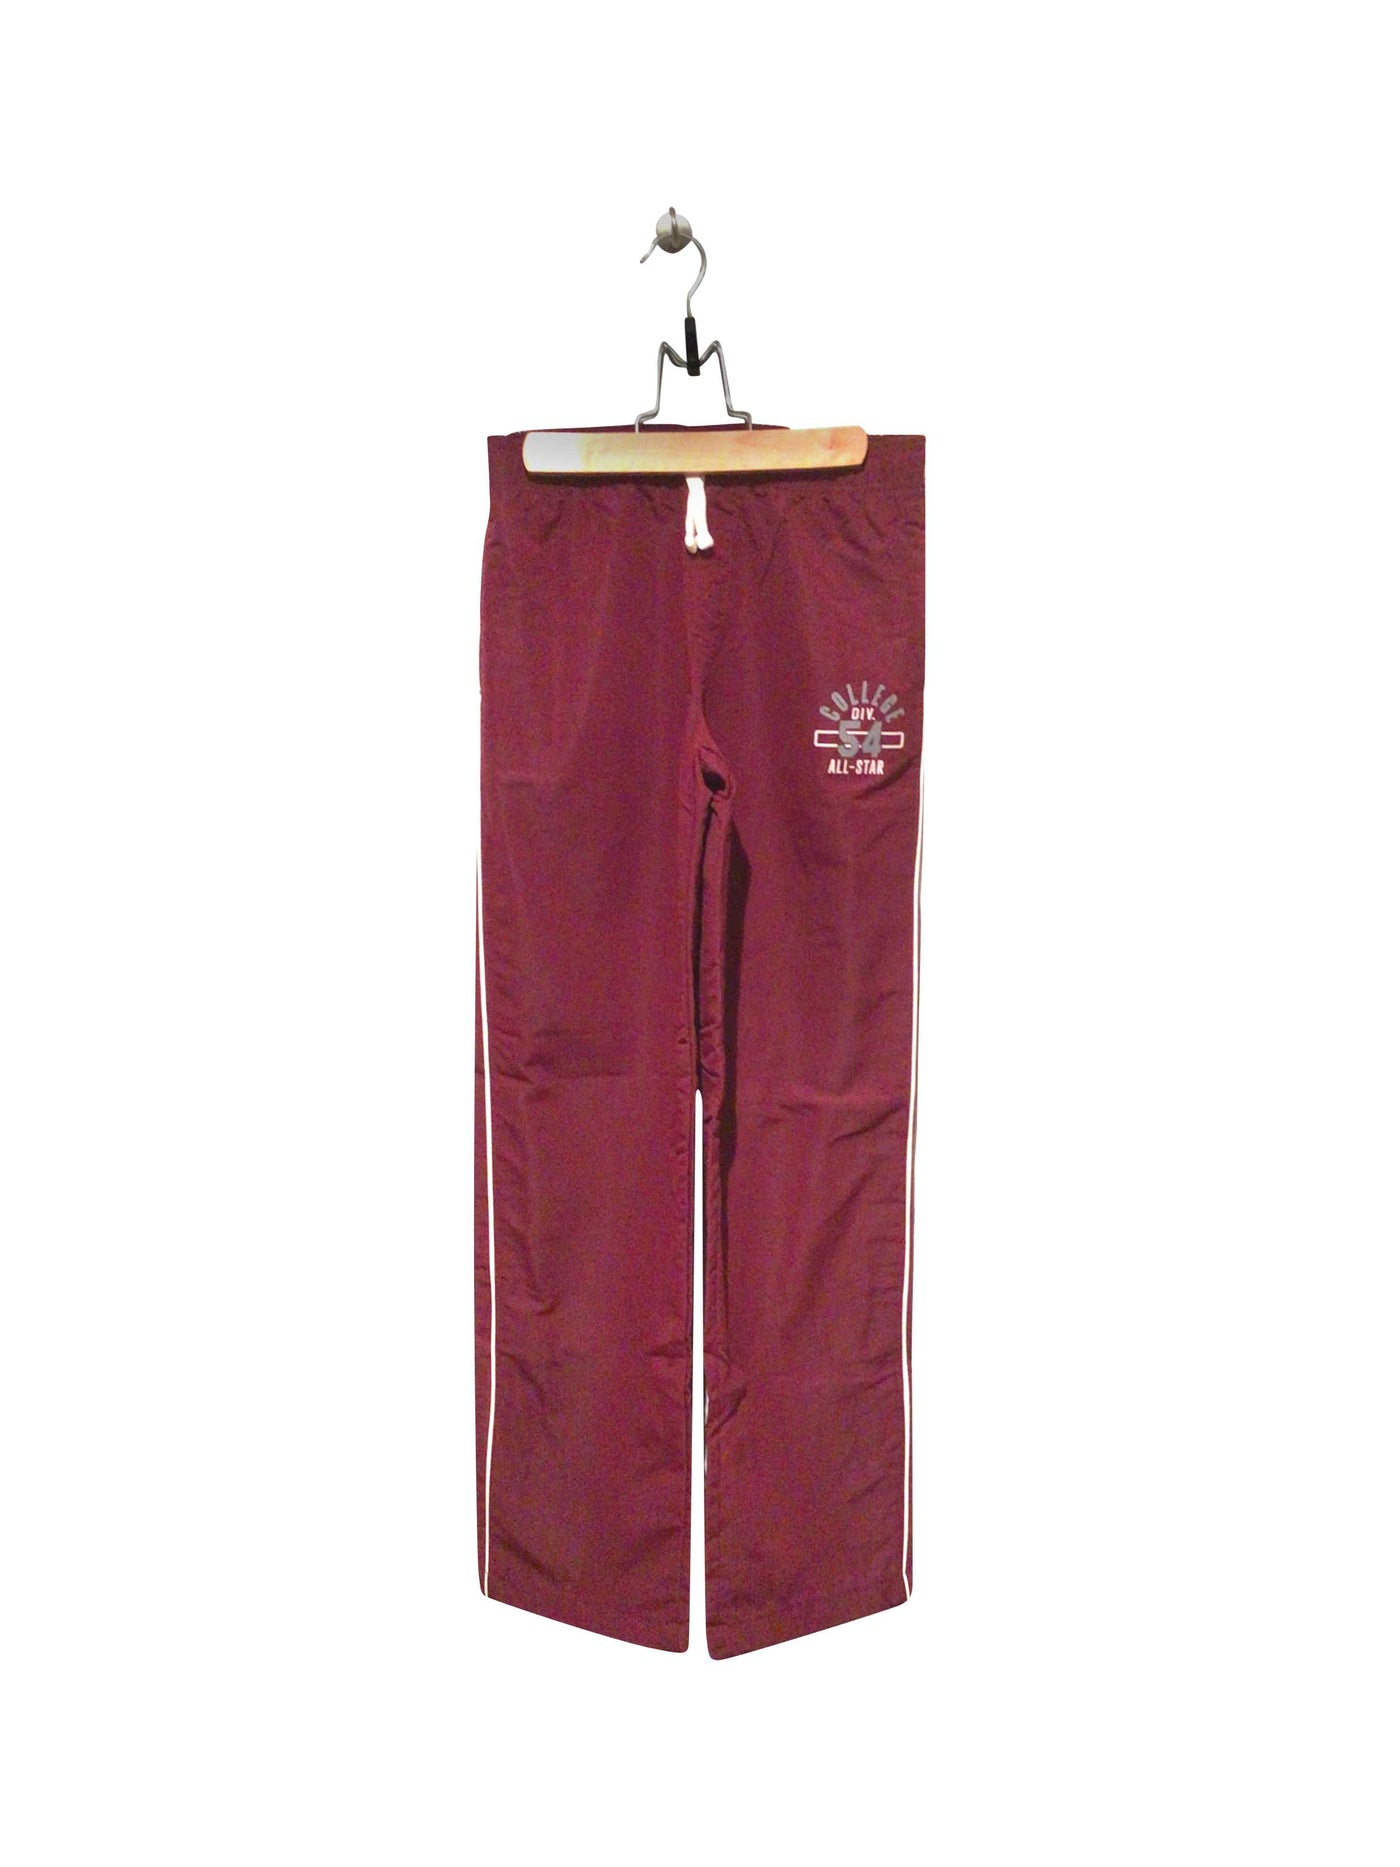 THE CHILDREN'S PLACE Regular fit Pant in Red  -  L